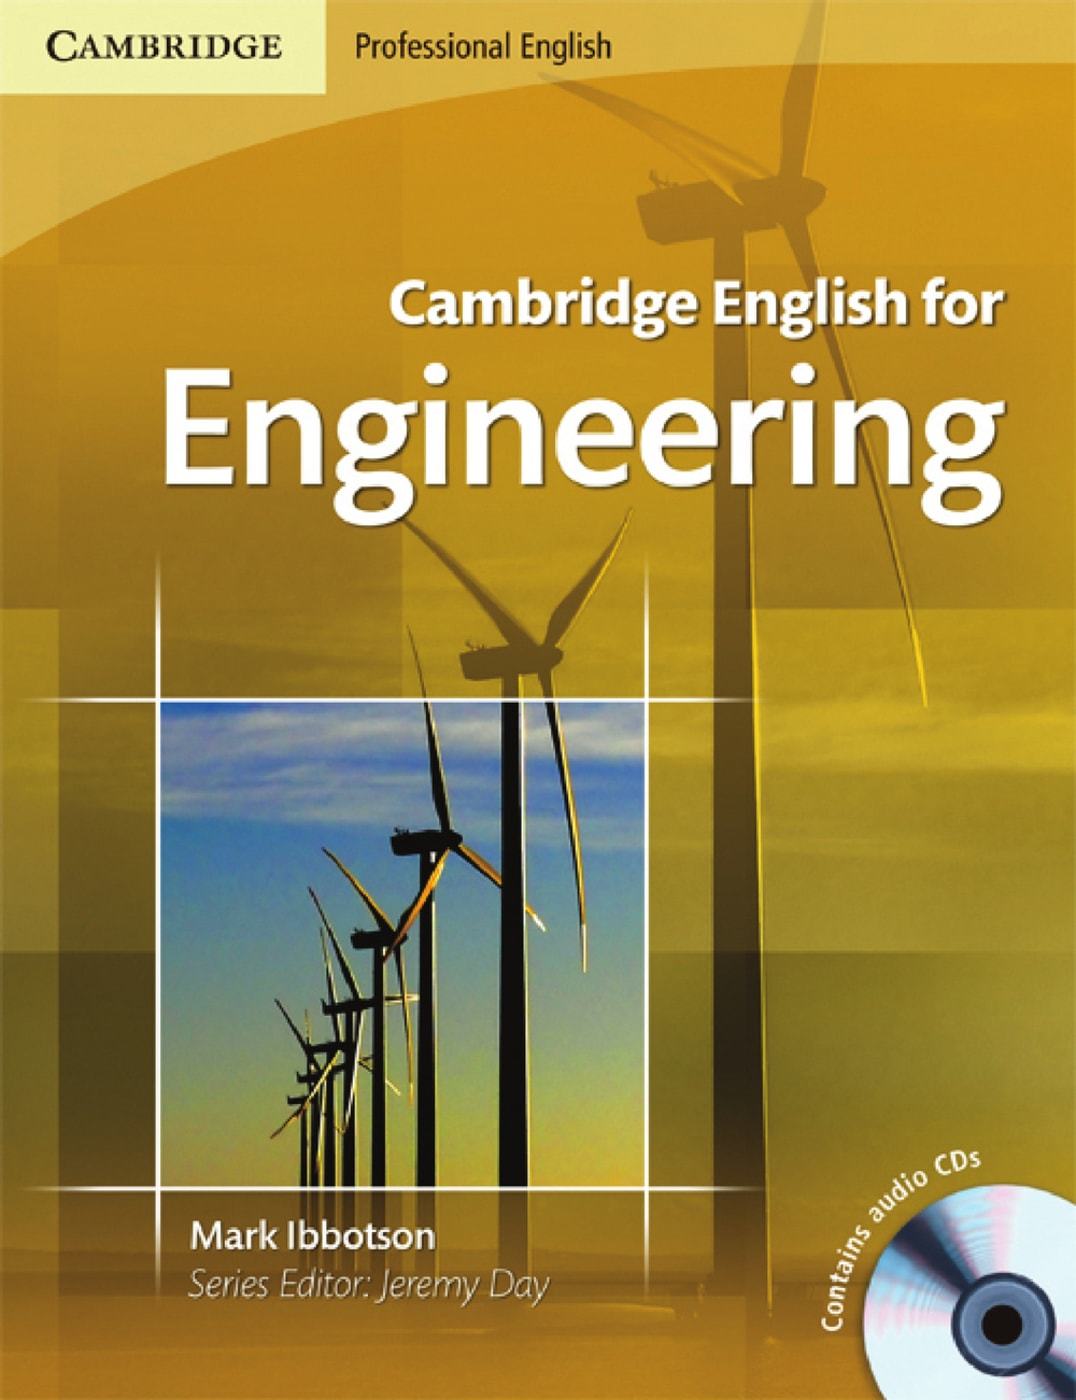 ISBN 9783125342866 "Cambridge English for Engineering Student's Book